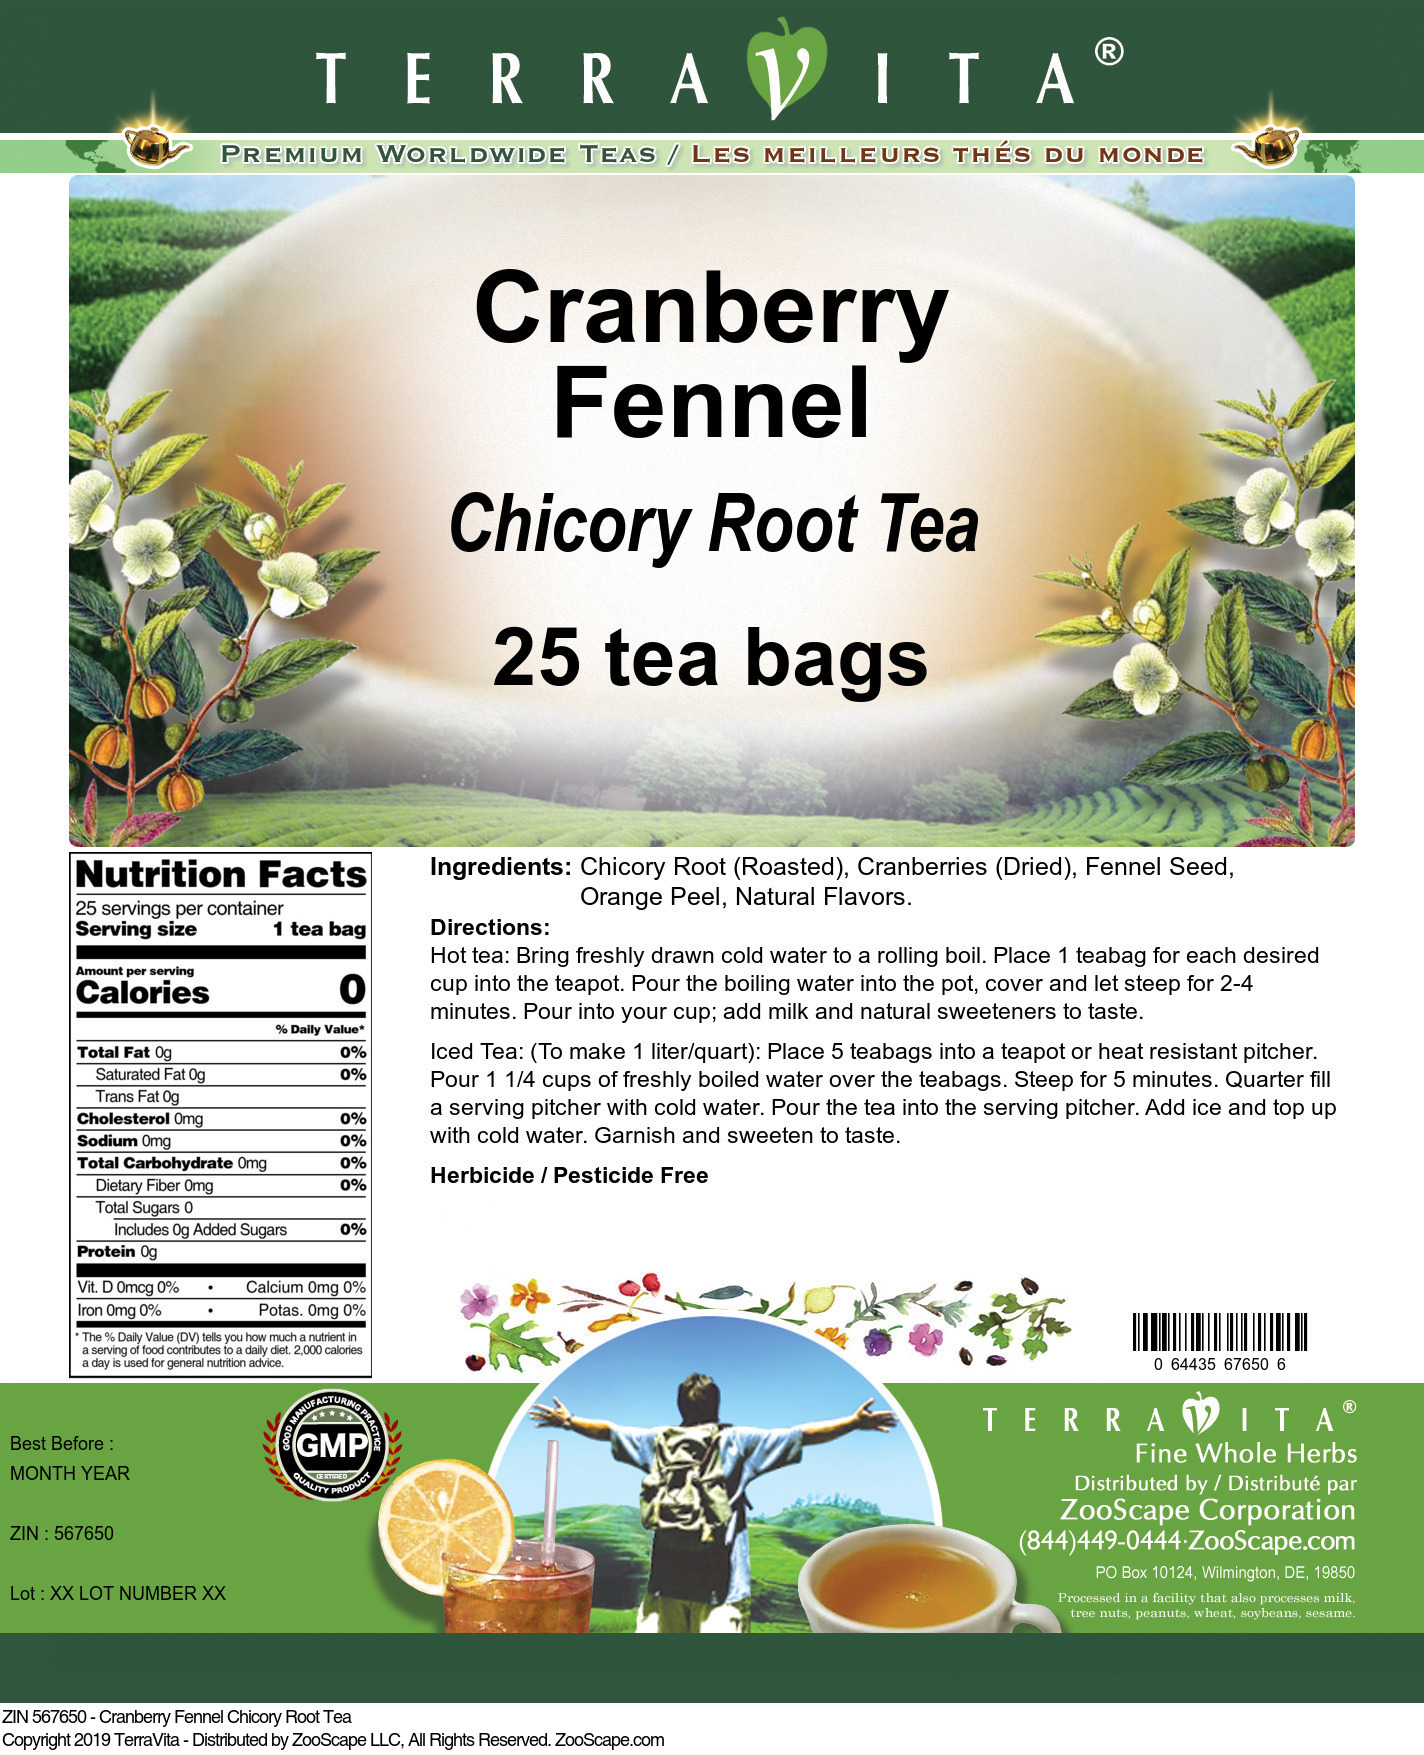 Cranberry Fennel Chicory Root Tea - Label